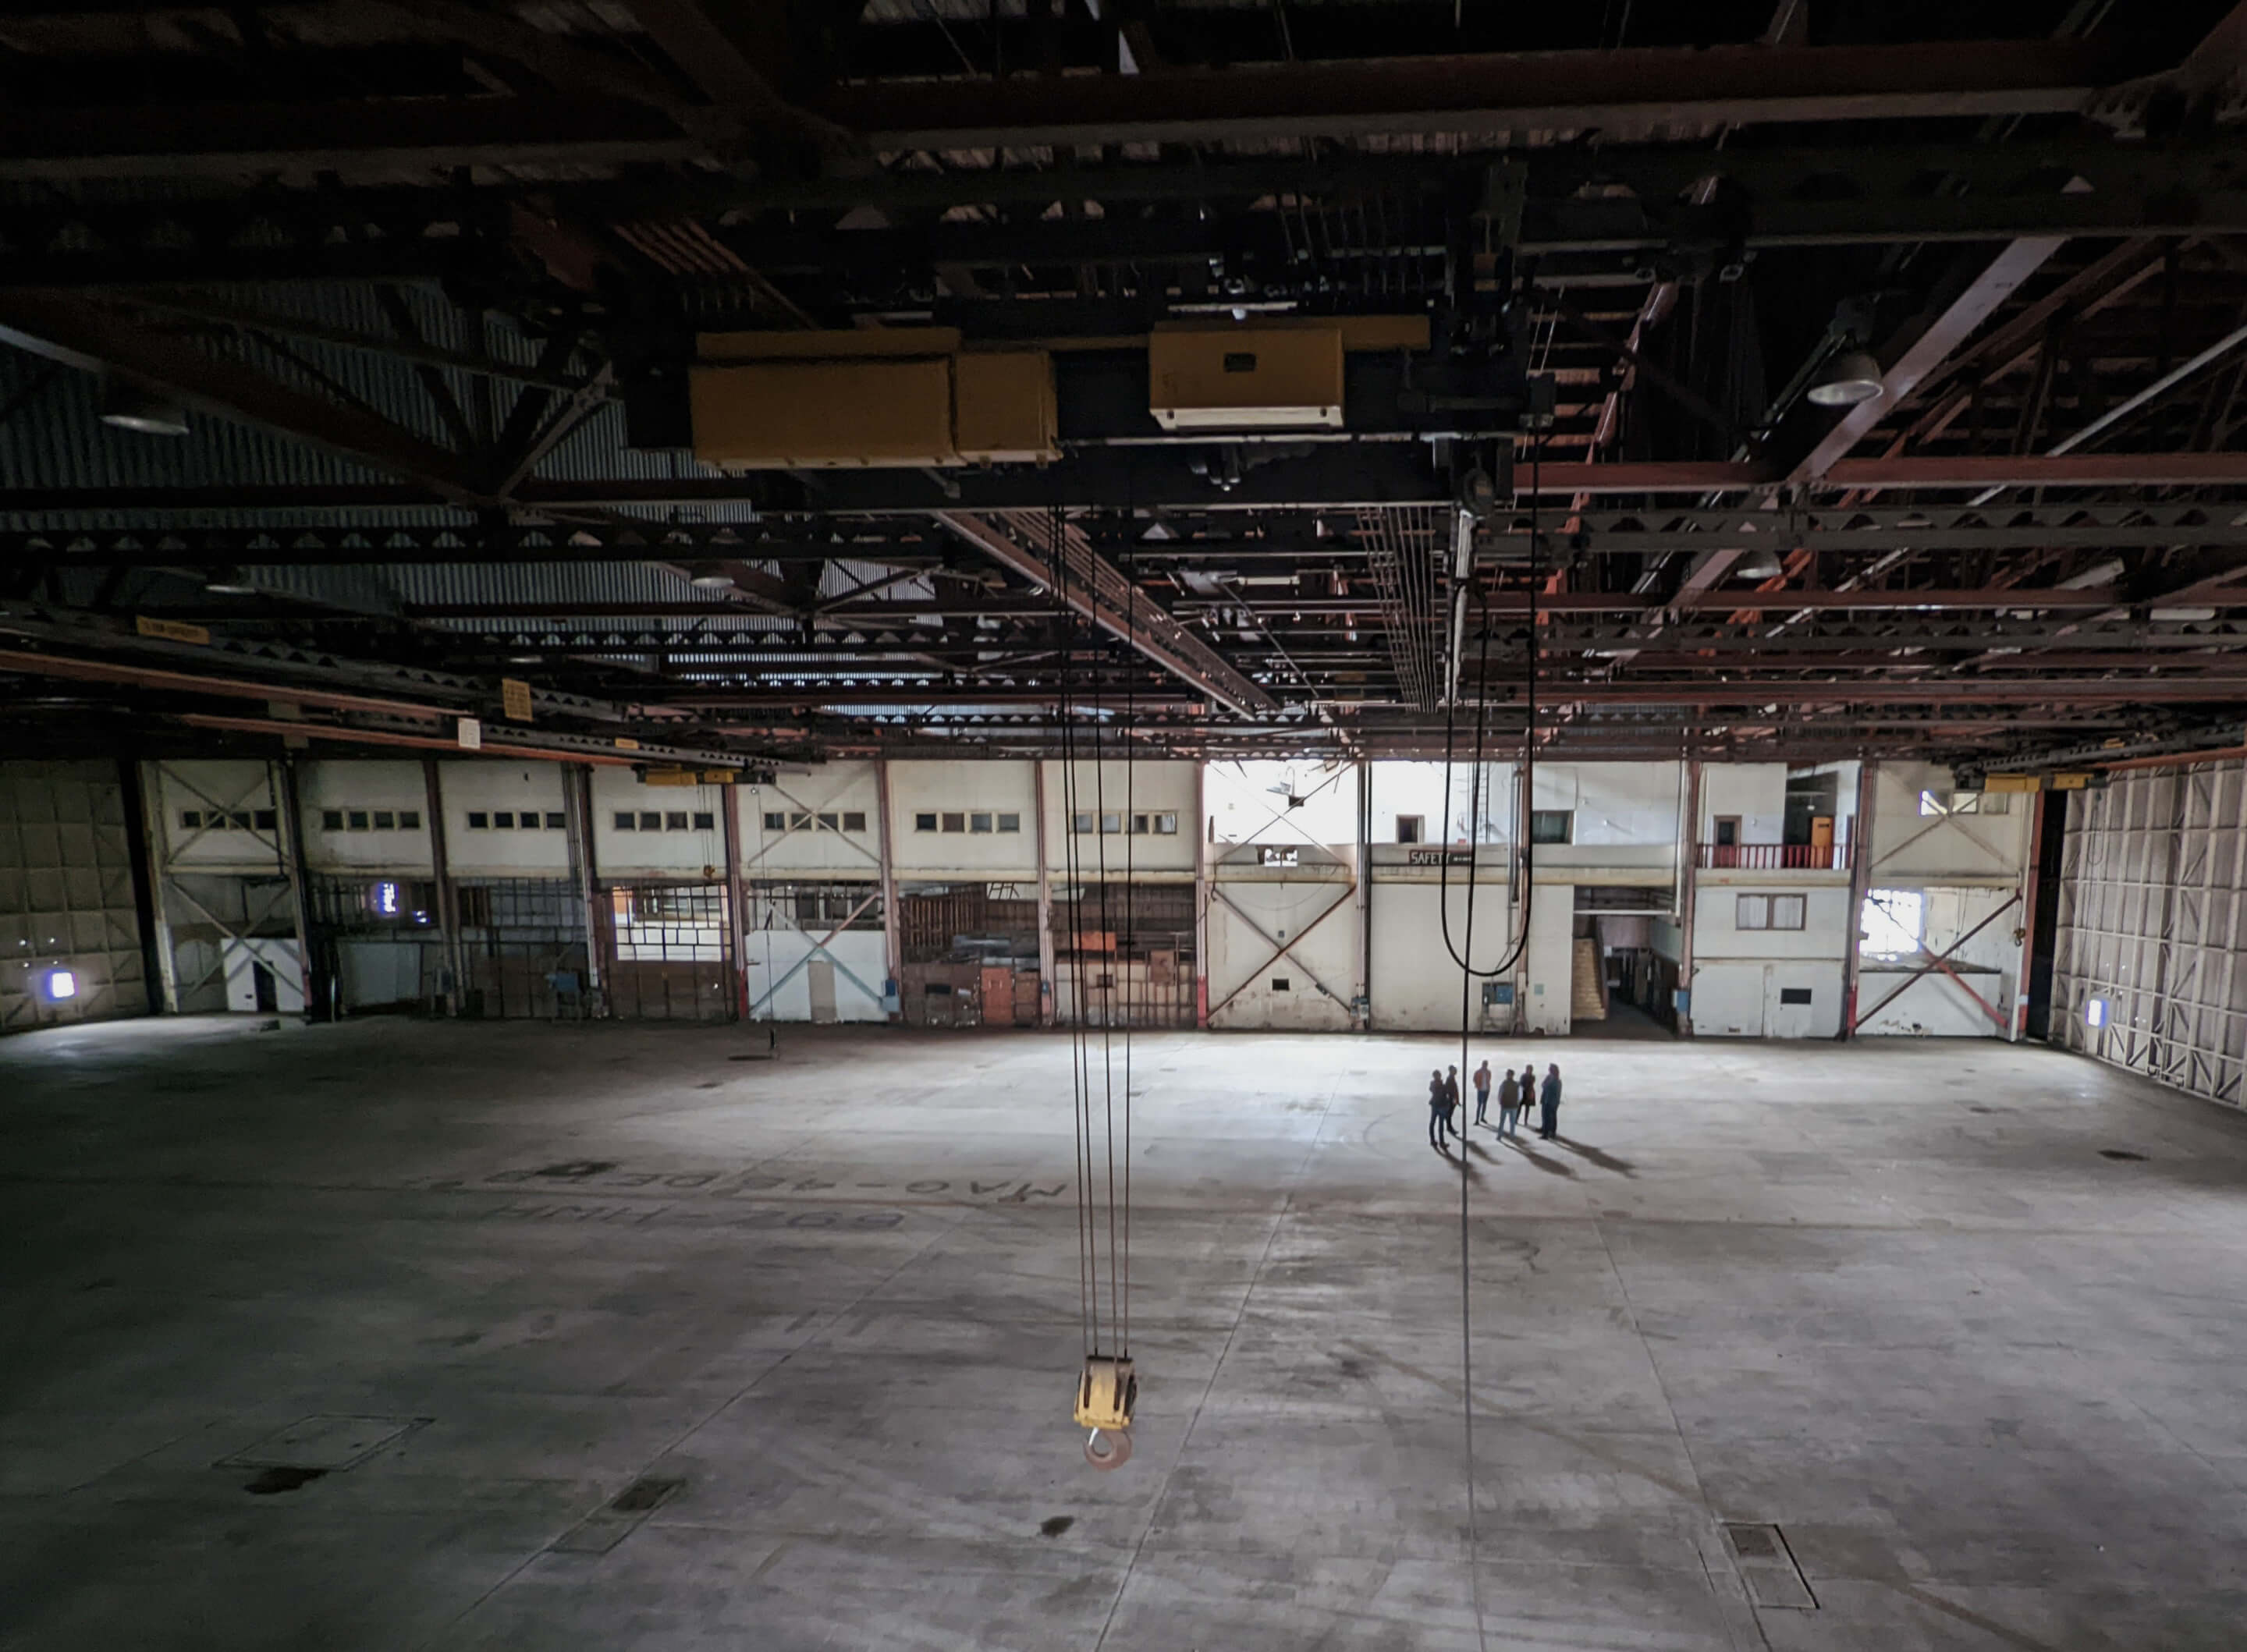 inside a disused military aviation building